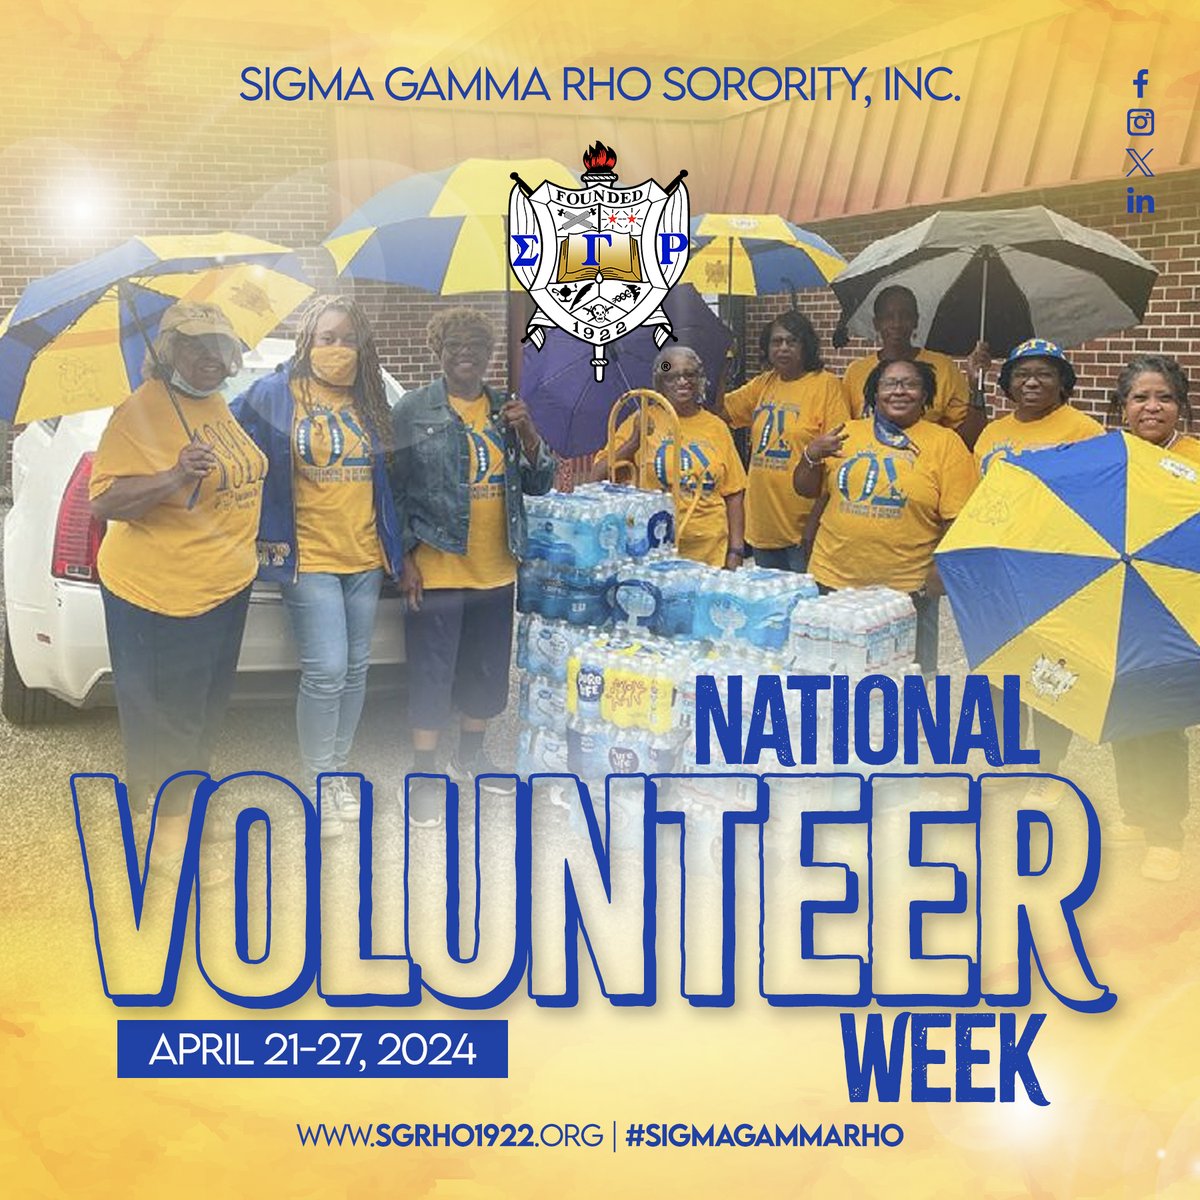 This week is #NationalVolunteerWeek ! As an organization committed to service, Sigma Gamma rho Sorority, Incorporated is proud to celebrate organizations and individuals committed to making our world a better place! RT with your favorite memory as a volunteer! #SigmaGammaRho